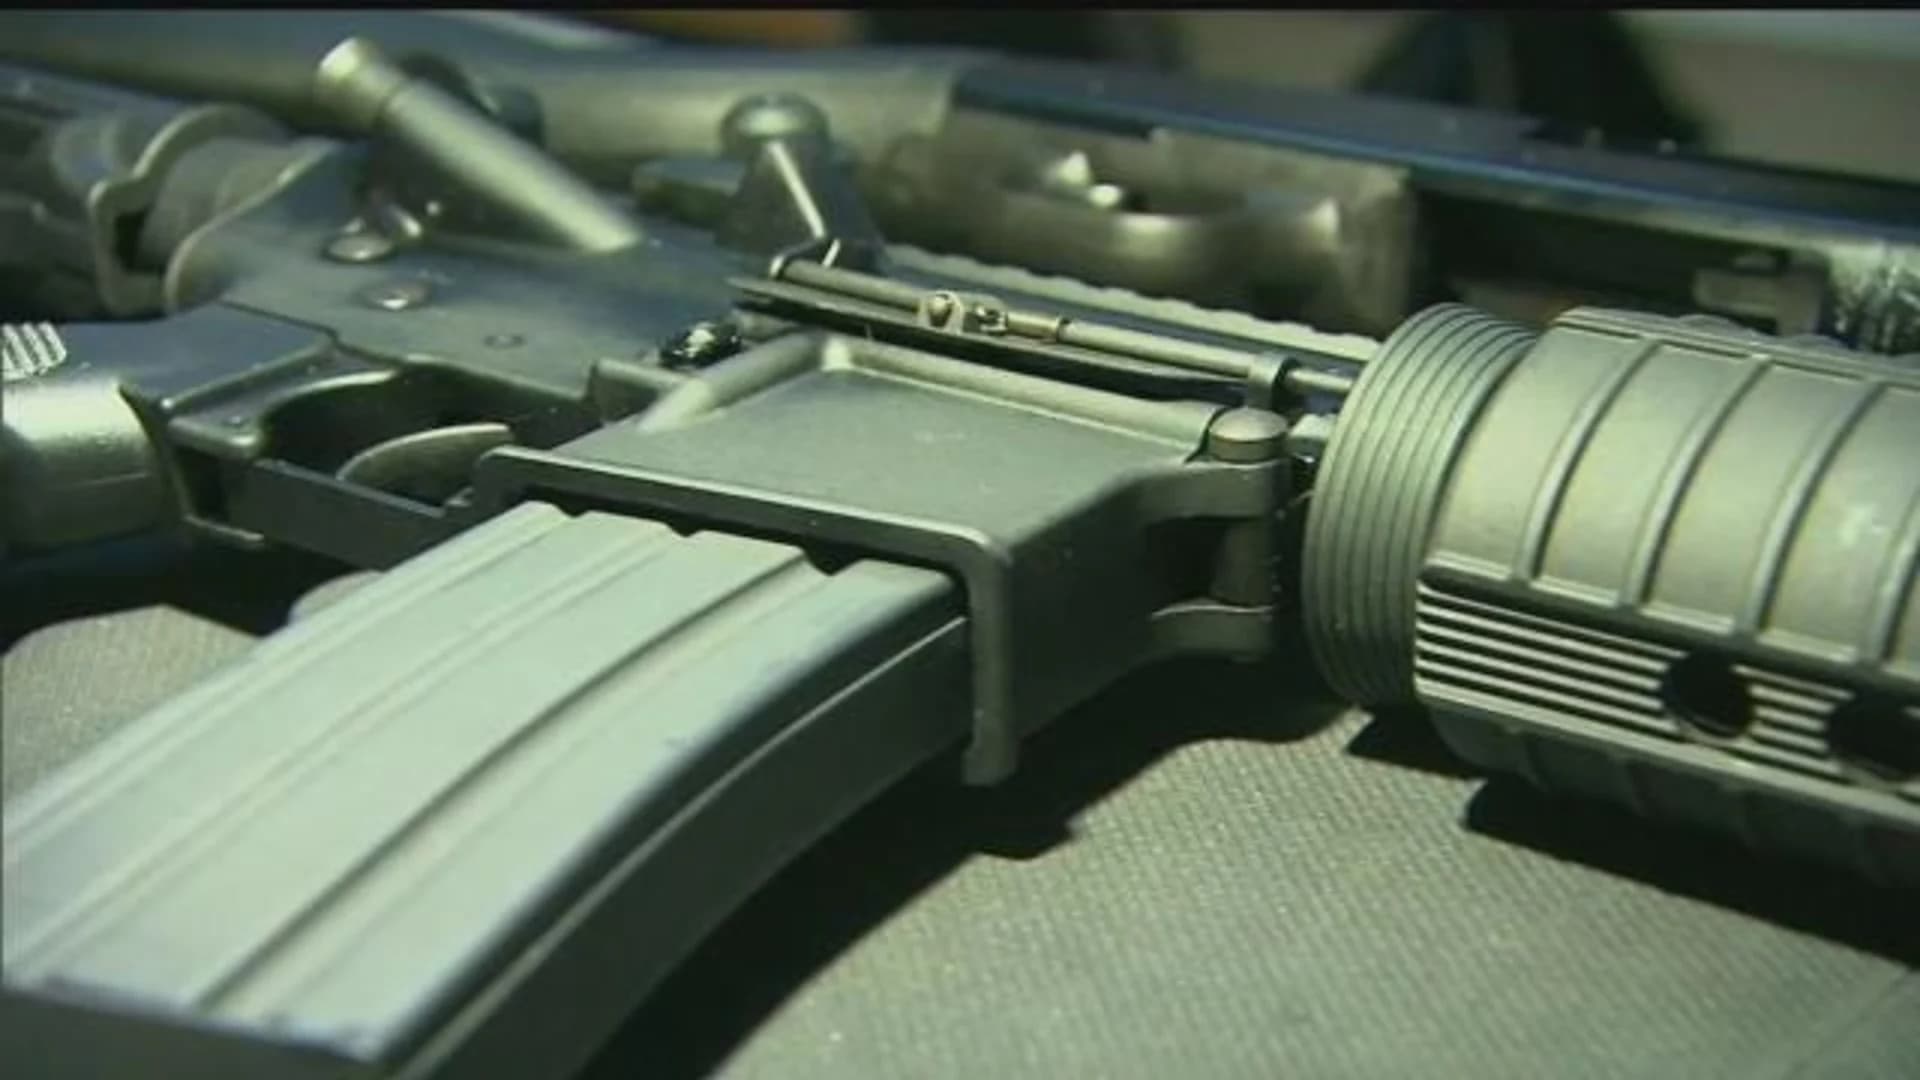 CT Supreme Court rules in favor of Sandy Hook lawsuit against AR-15 style gun-maker